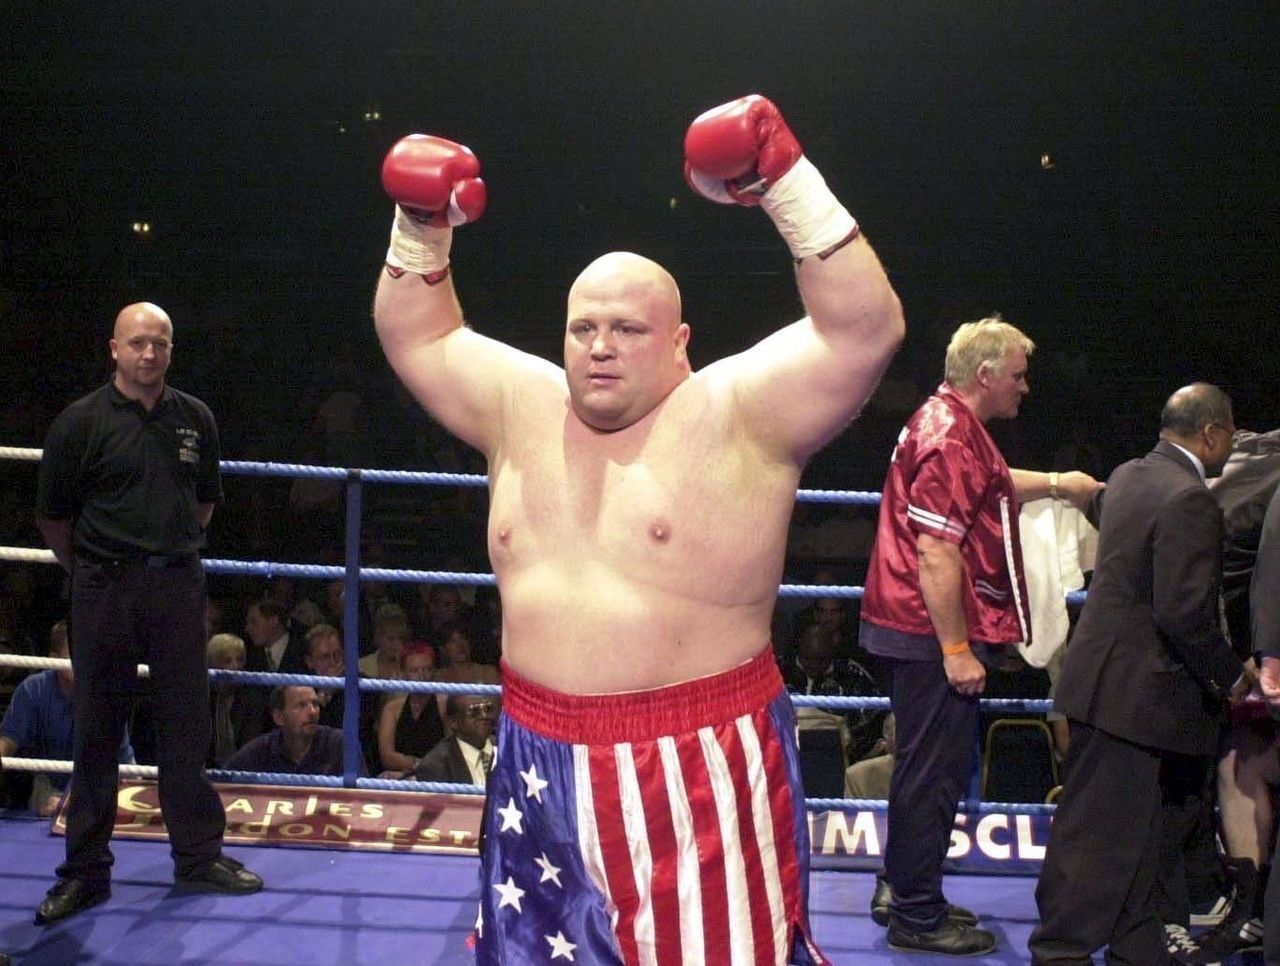 Upvote if you think Mayweather's next opponent should be Butterbean